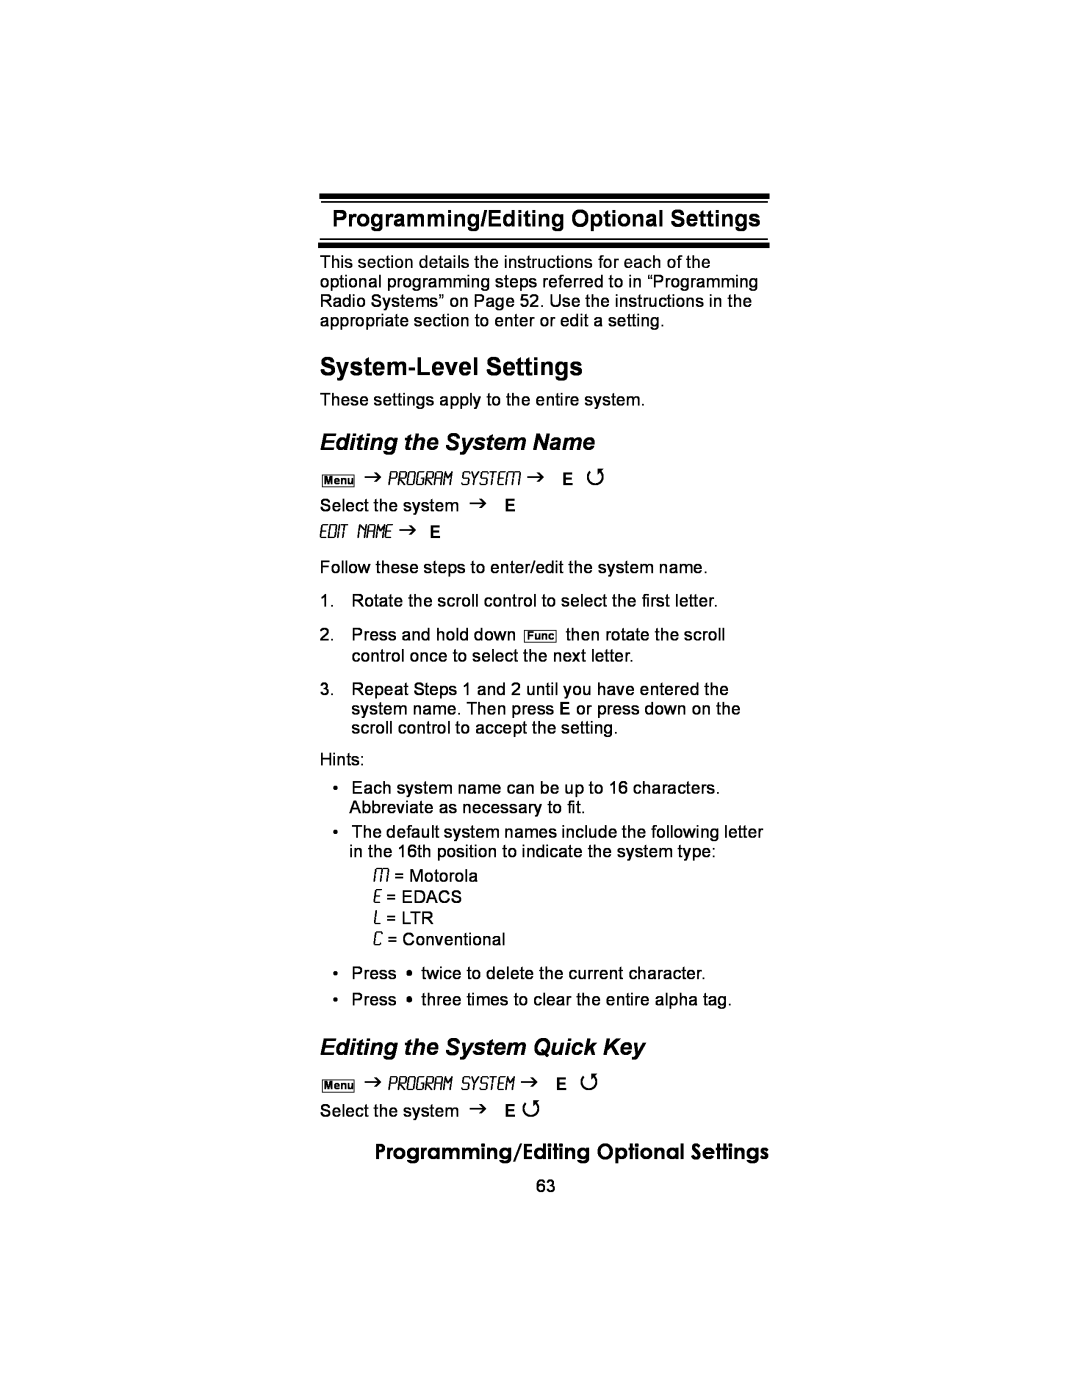 Uniden BC246T owner manual System-LevelSettings, Editing the System Name, Editing the System Quick Key 